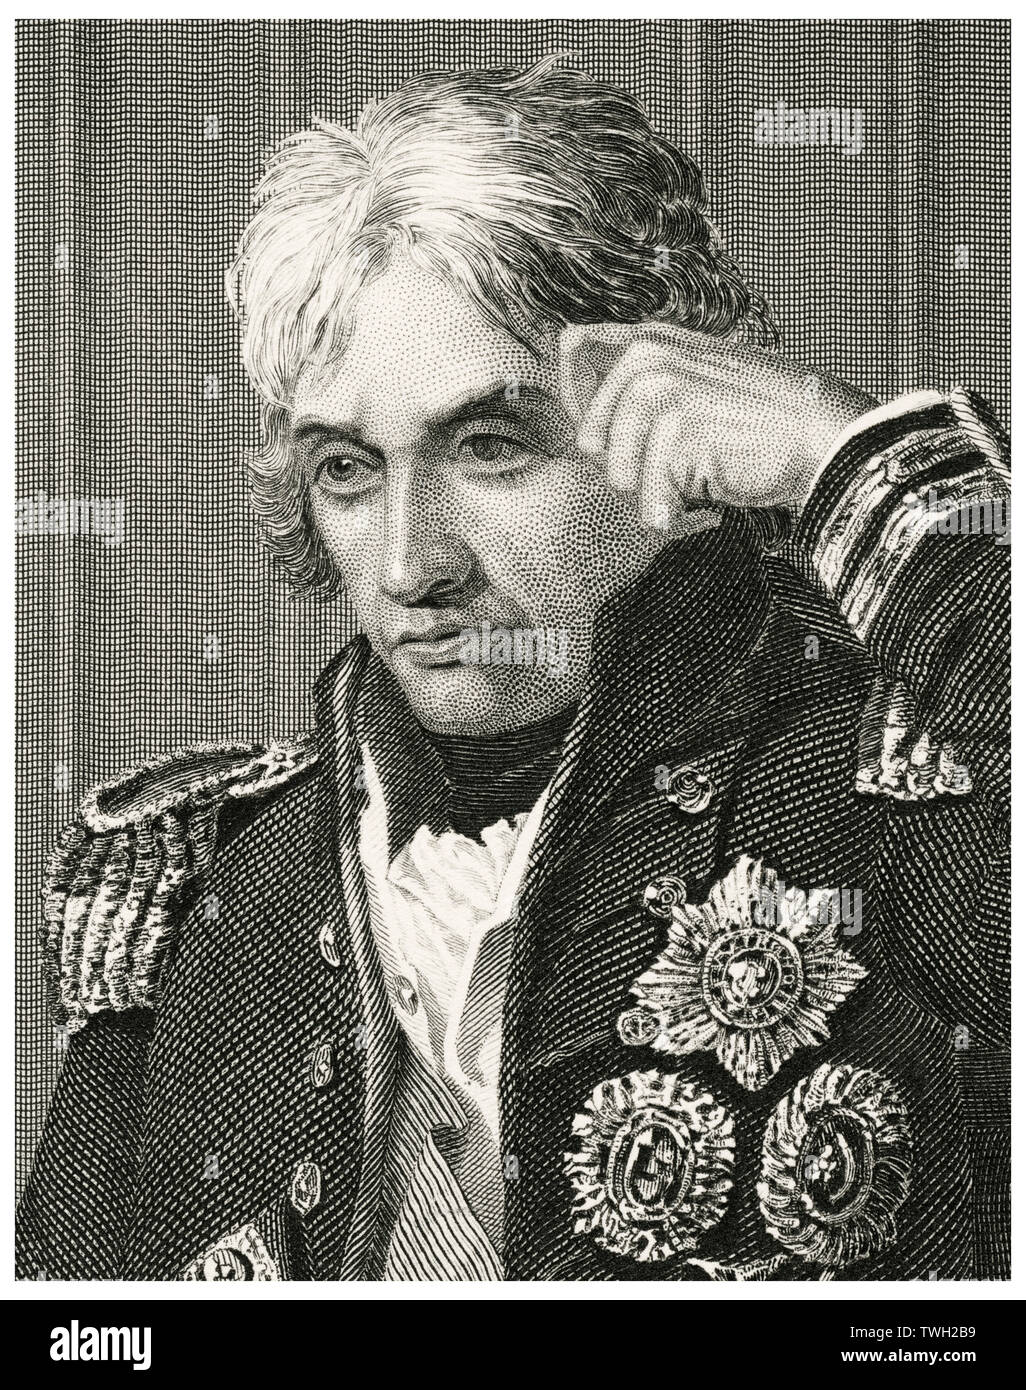 Horatio Nelson (1758-1805), English Admiral and Naval Commander, Head and Shoulders Portrait, Steel Engraving, Portrait Gallery of Eminent Men and Women of Europe and America by Evert A. Duyckinck, Published by Henry J. Johnson, Johnson, Wilson & Company, New York, 1873 Stock Photo